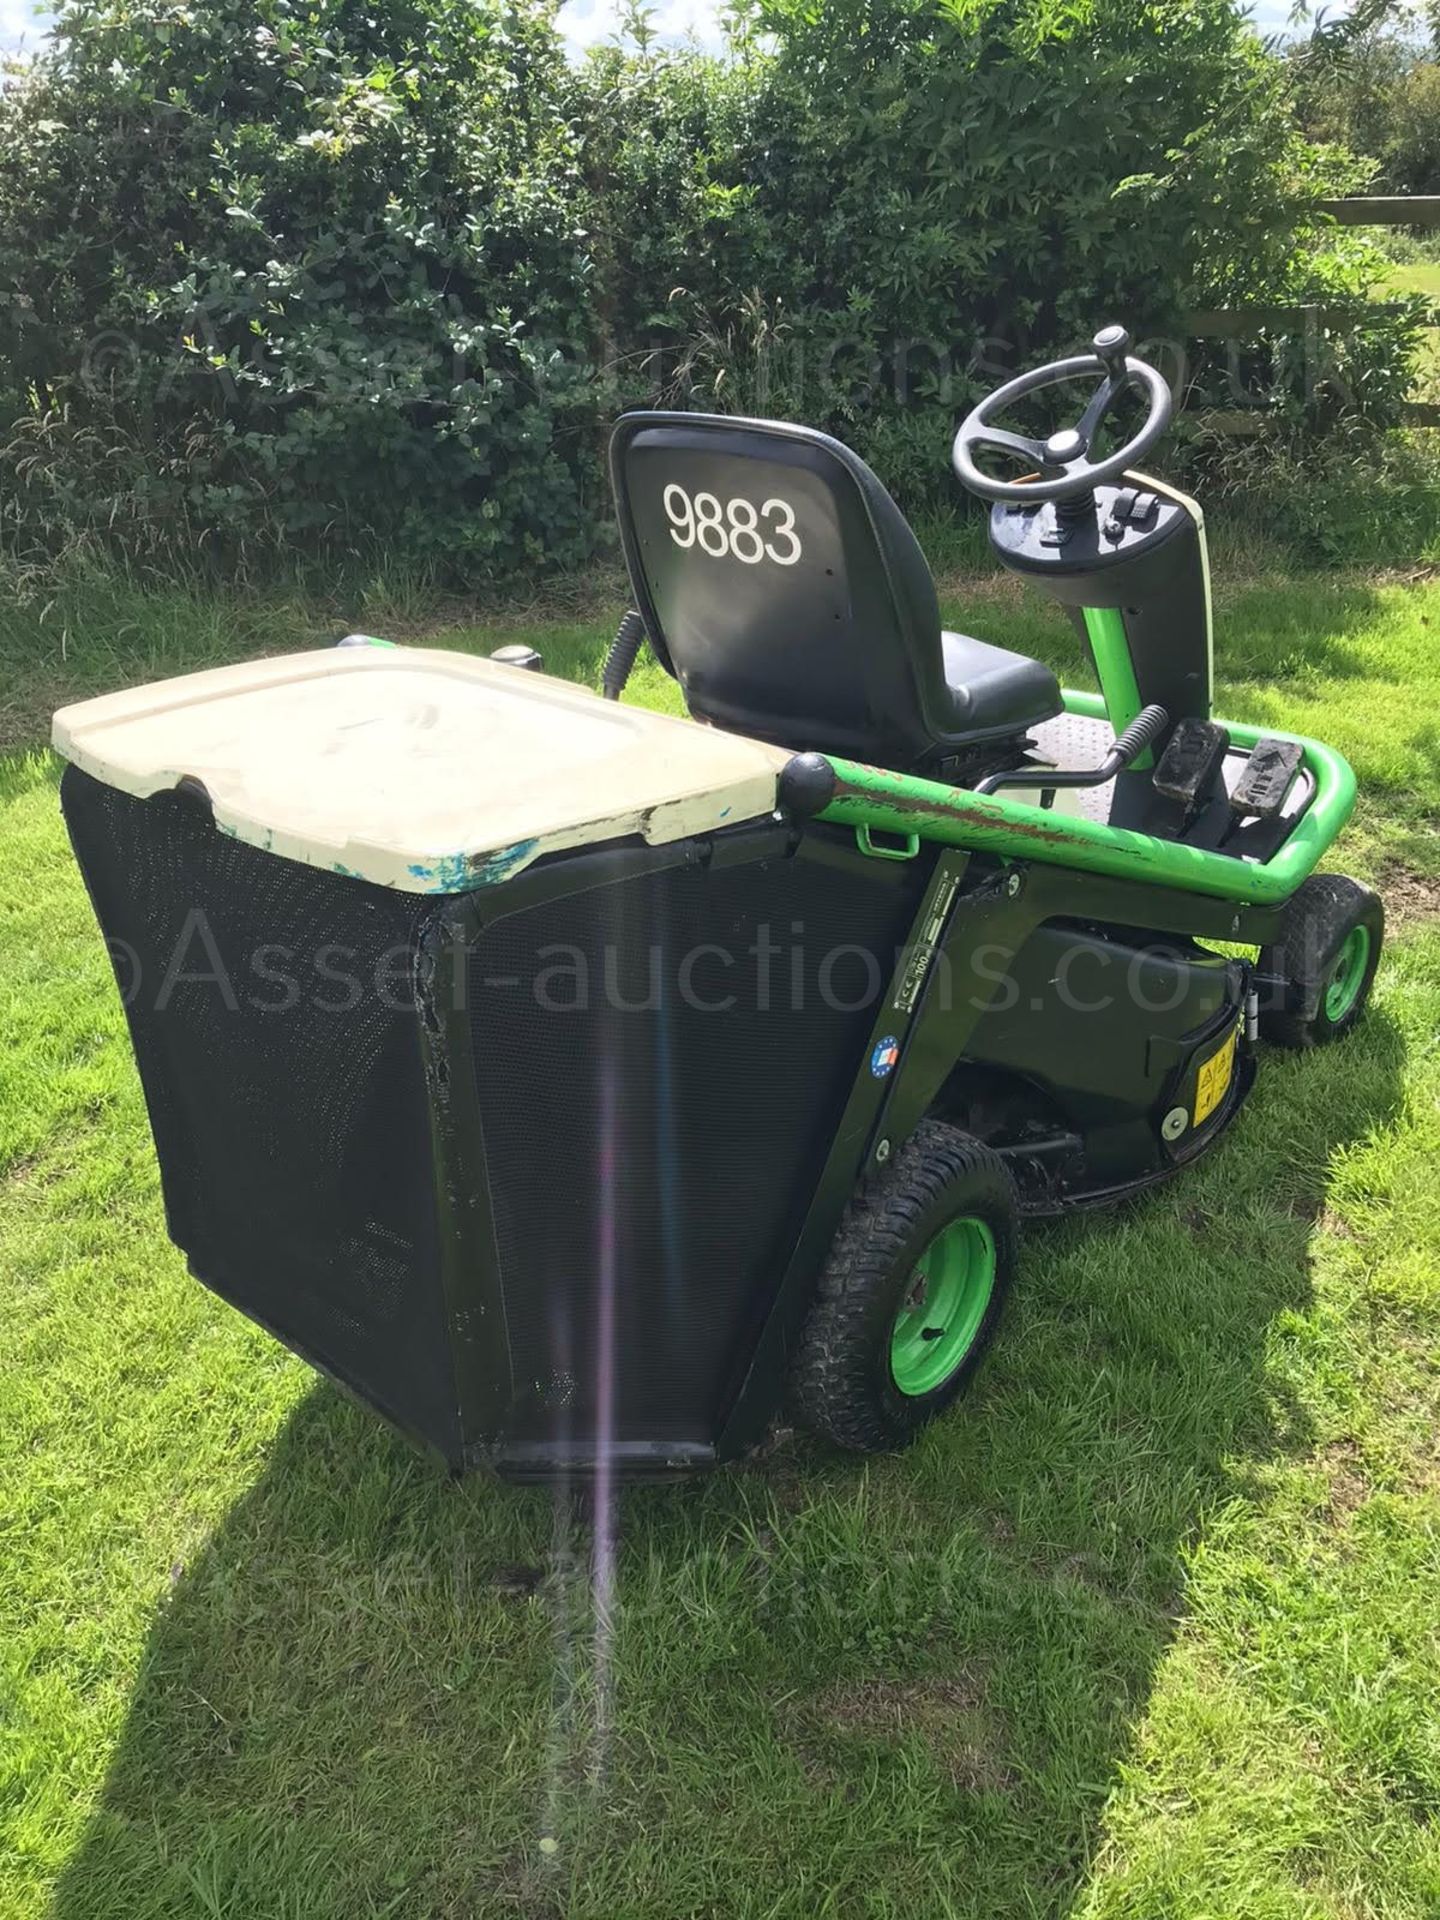 2014 ETESIA HYDRO 80 RIDE ON LAWN MOWER C/W REAR GRASS COLLECTOR, RUNS, DRIVES AND CUTS *PLUS VAT* - Image 5 of 5